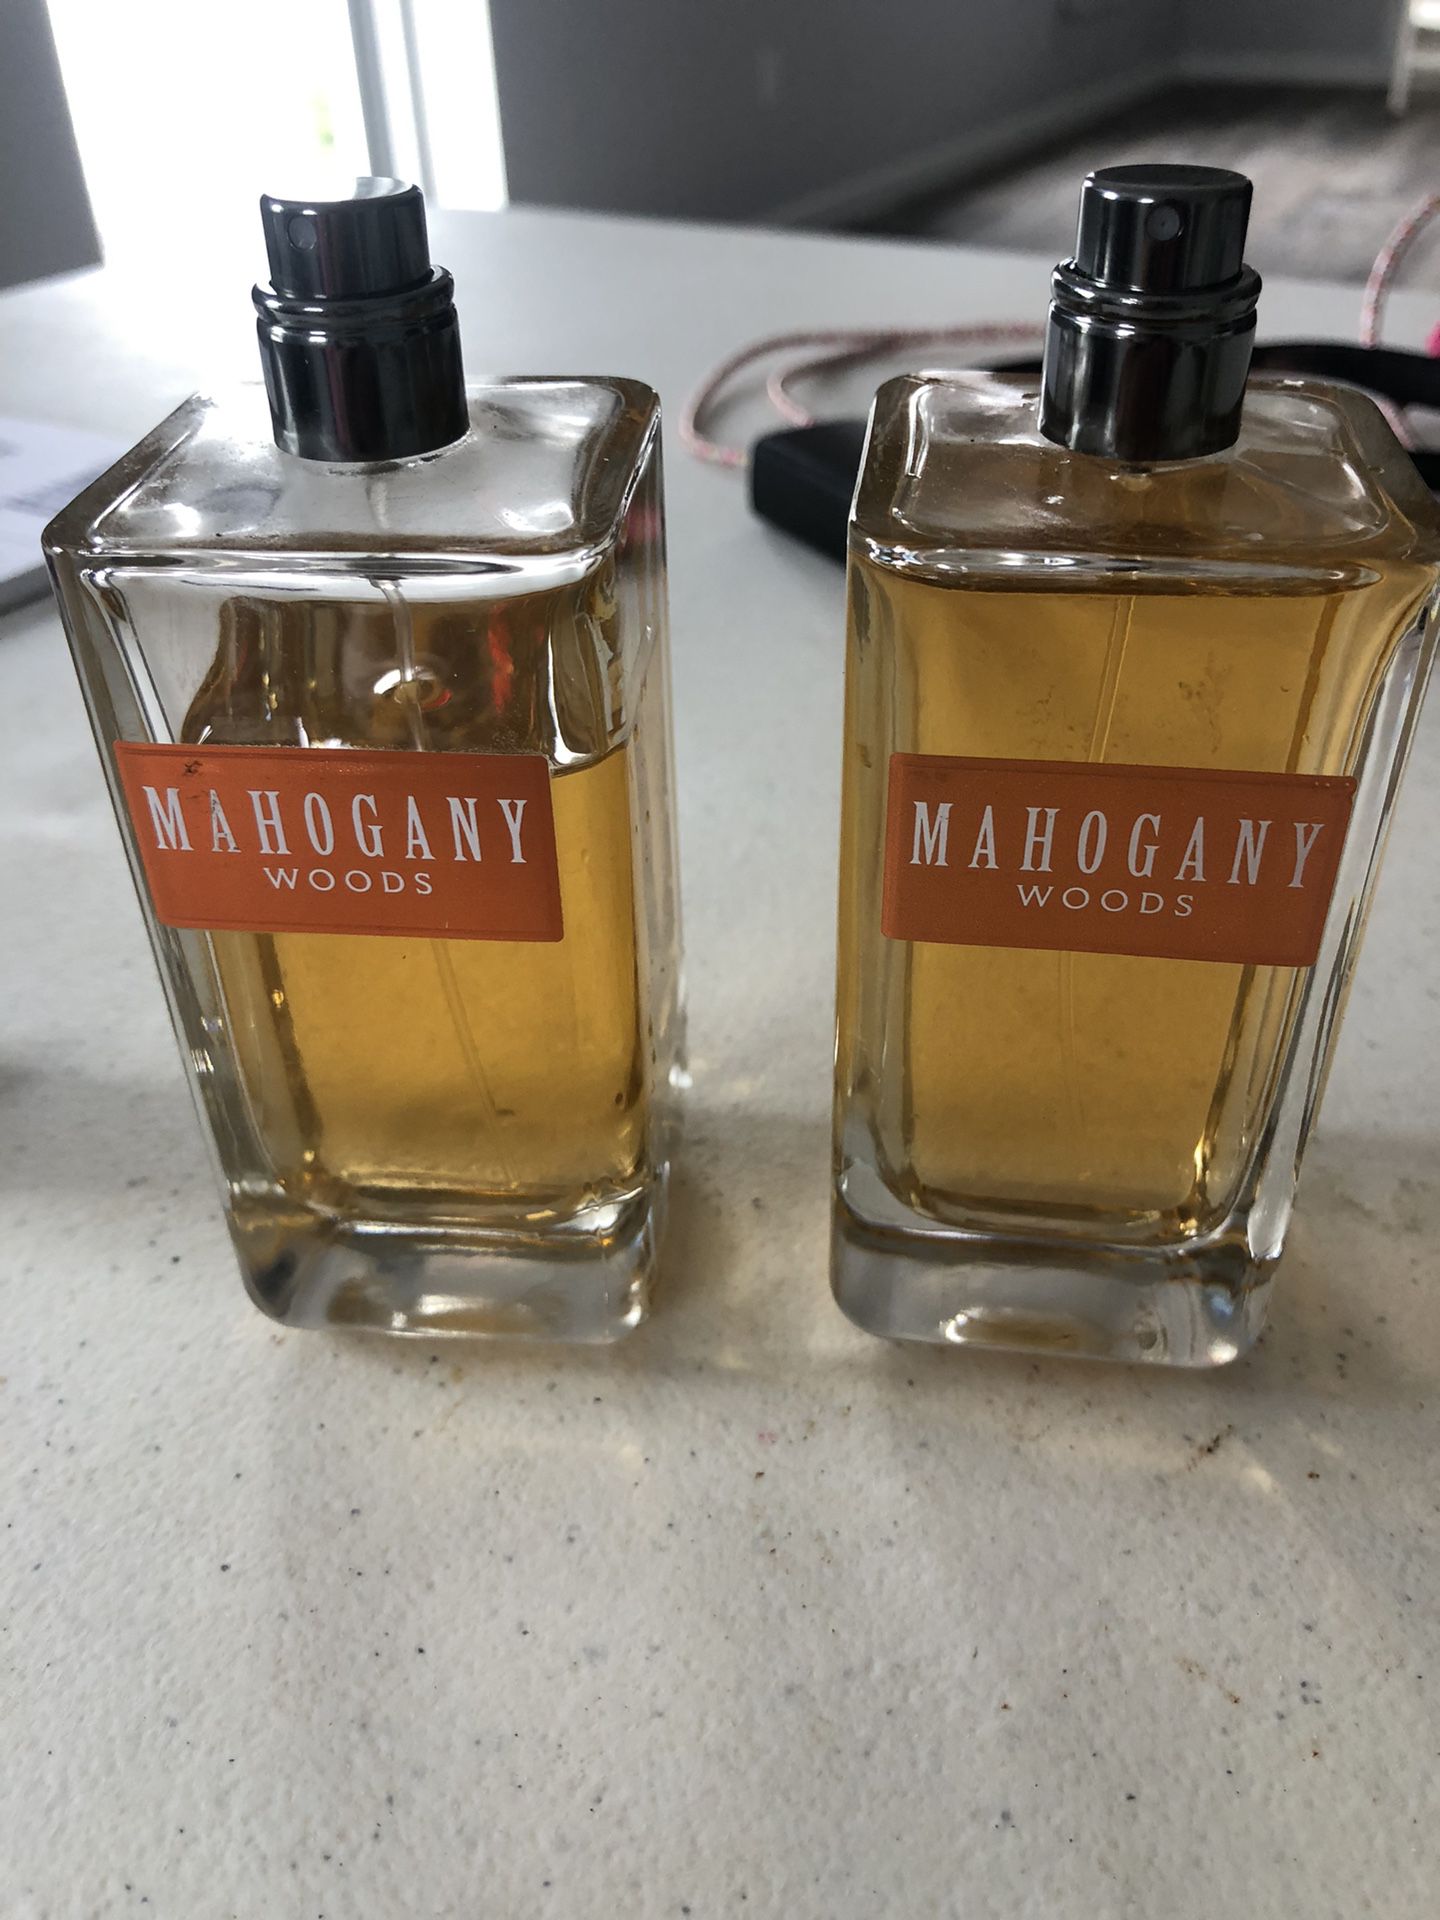 Rare Find Mahogany Cologne For Men Bath And Body Works Smells Great